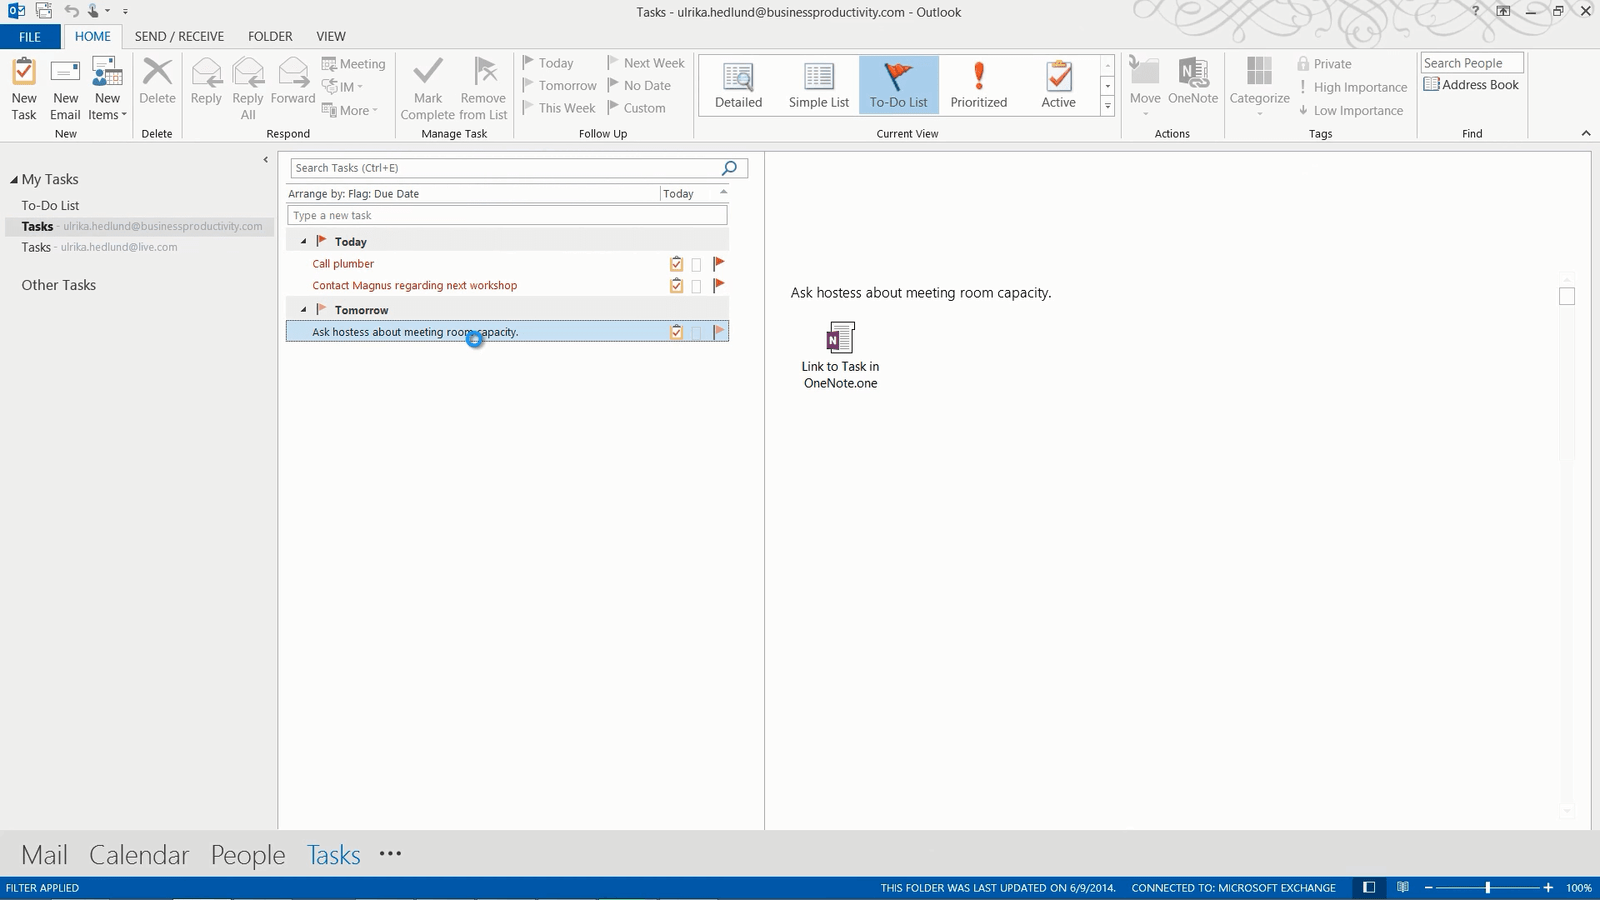 How to create an Outlook task